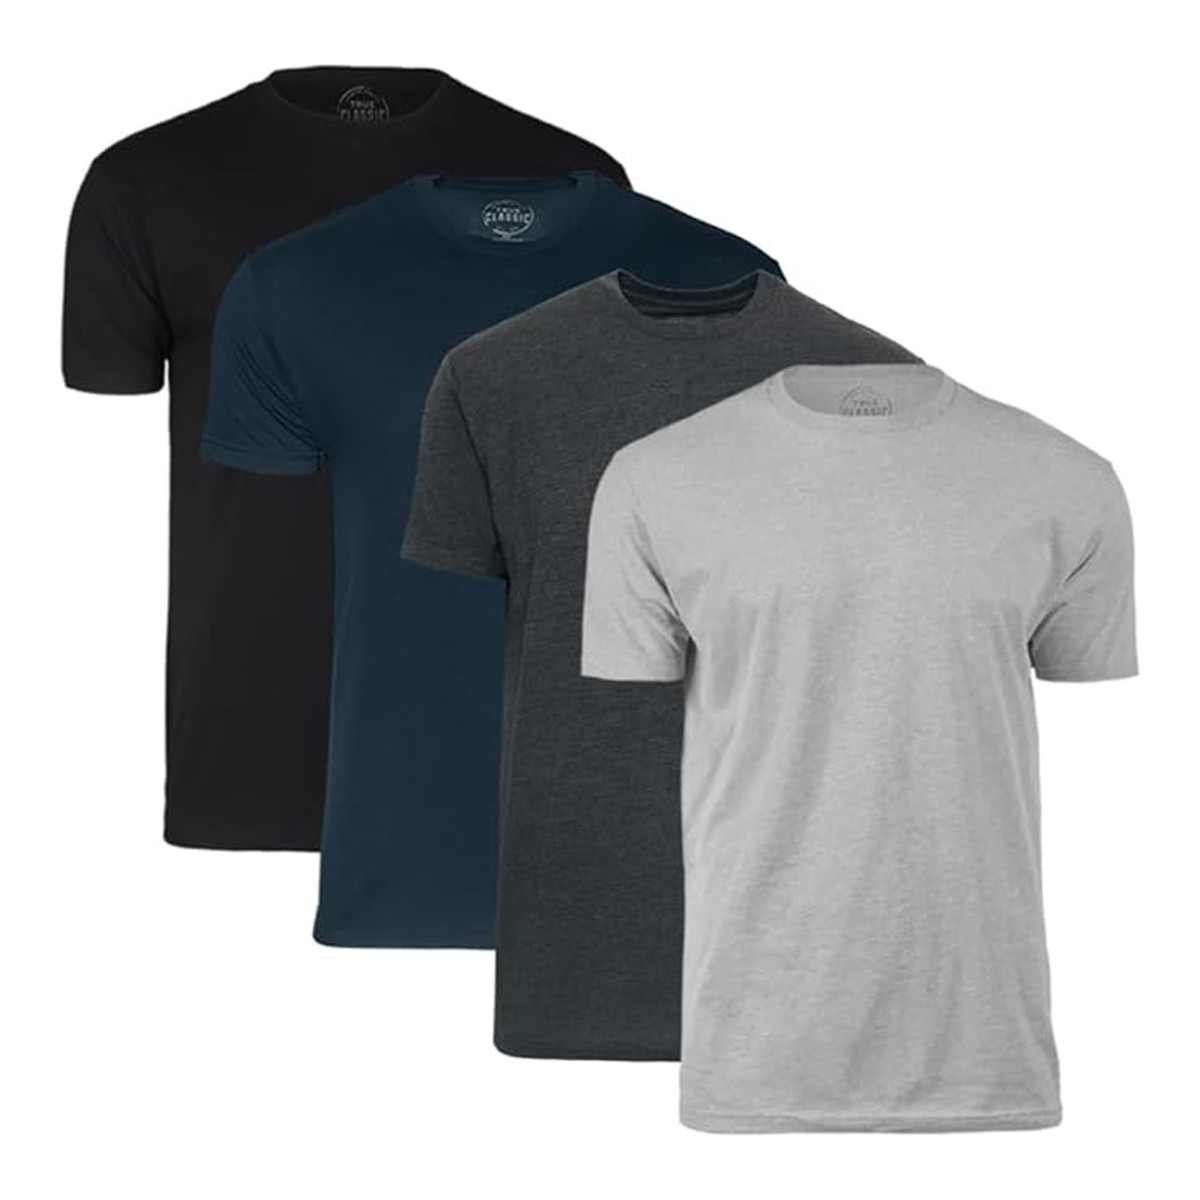 True Classic T-Shirts Are $17 Apiece on Amazon Right Now - Men's Journal